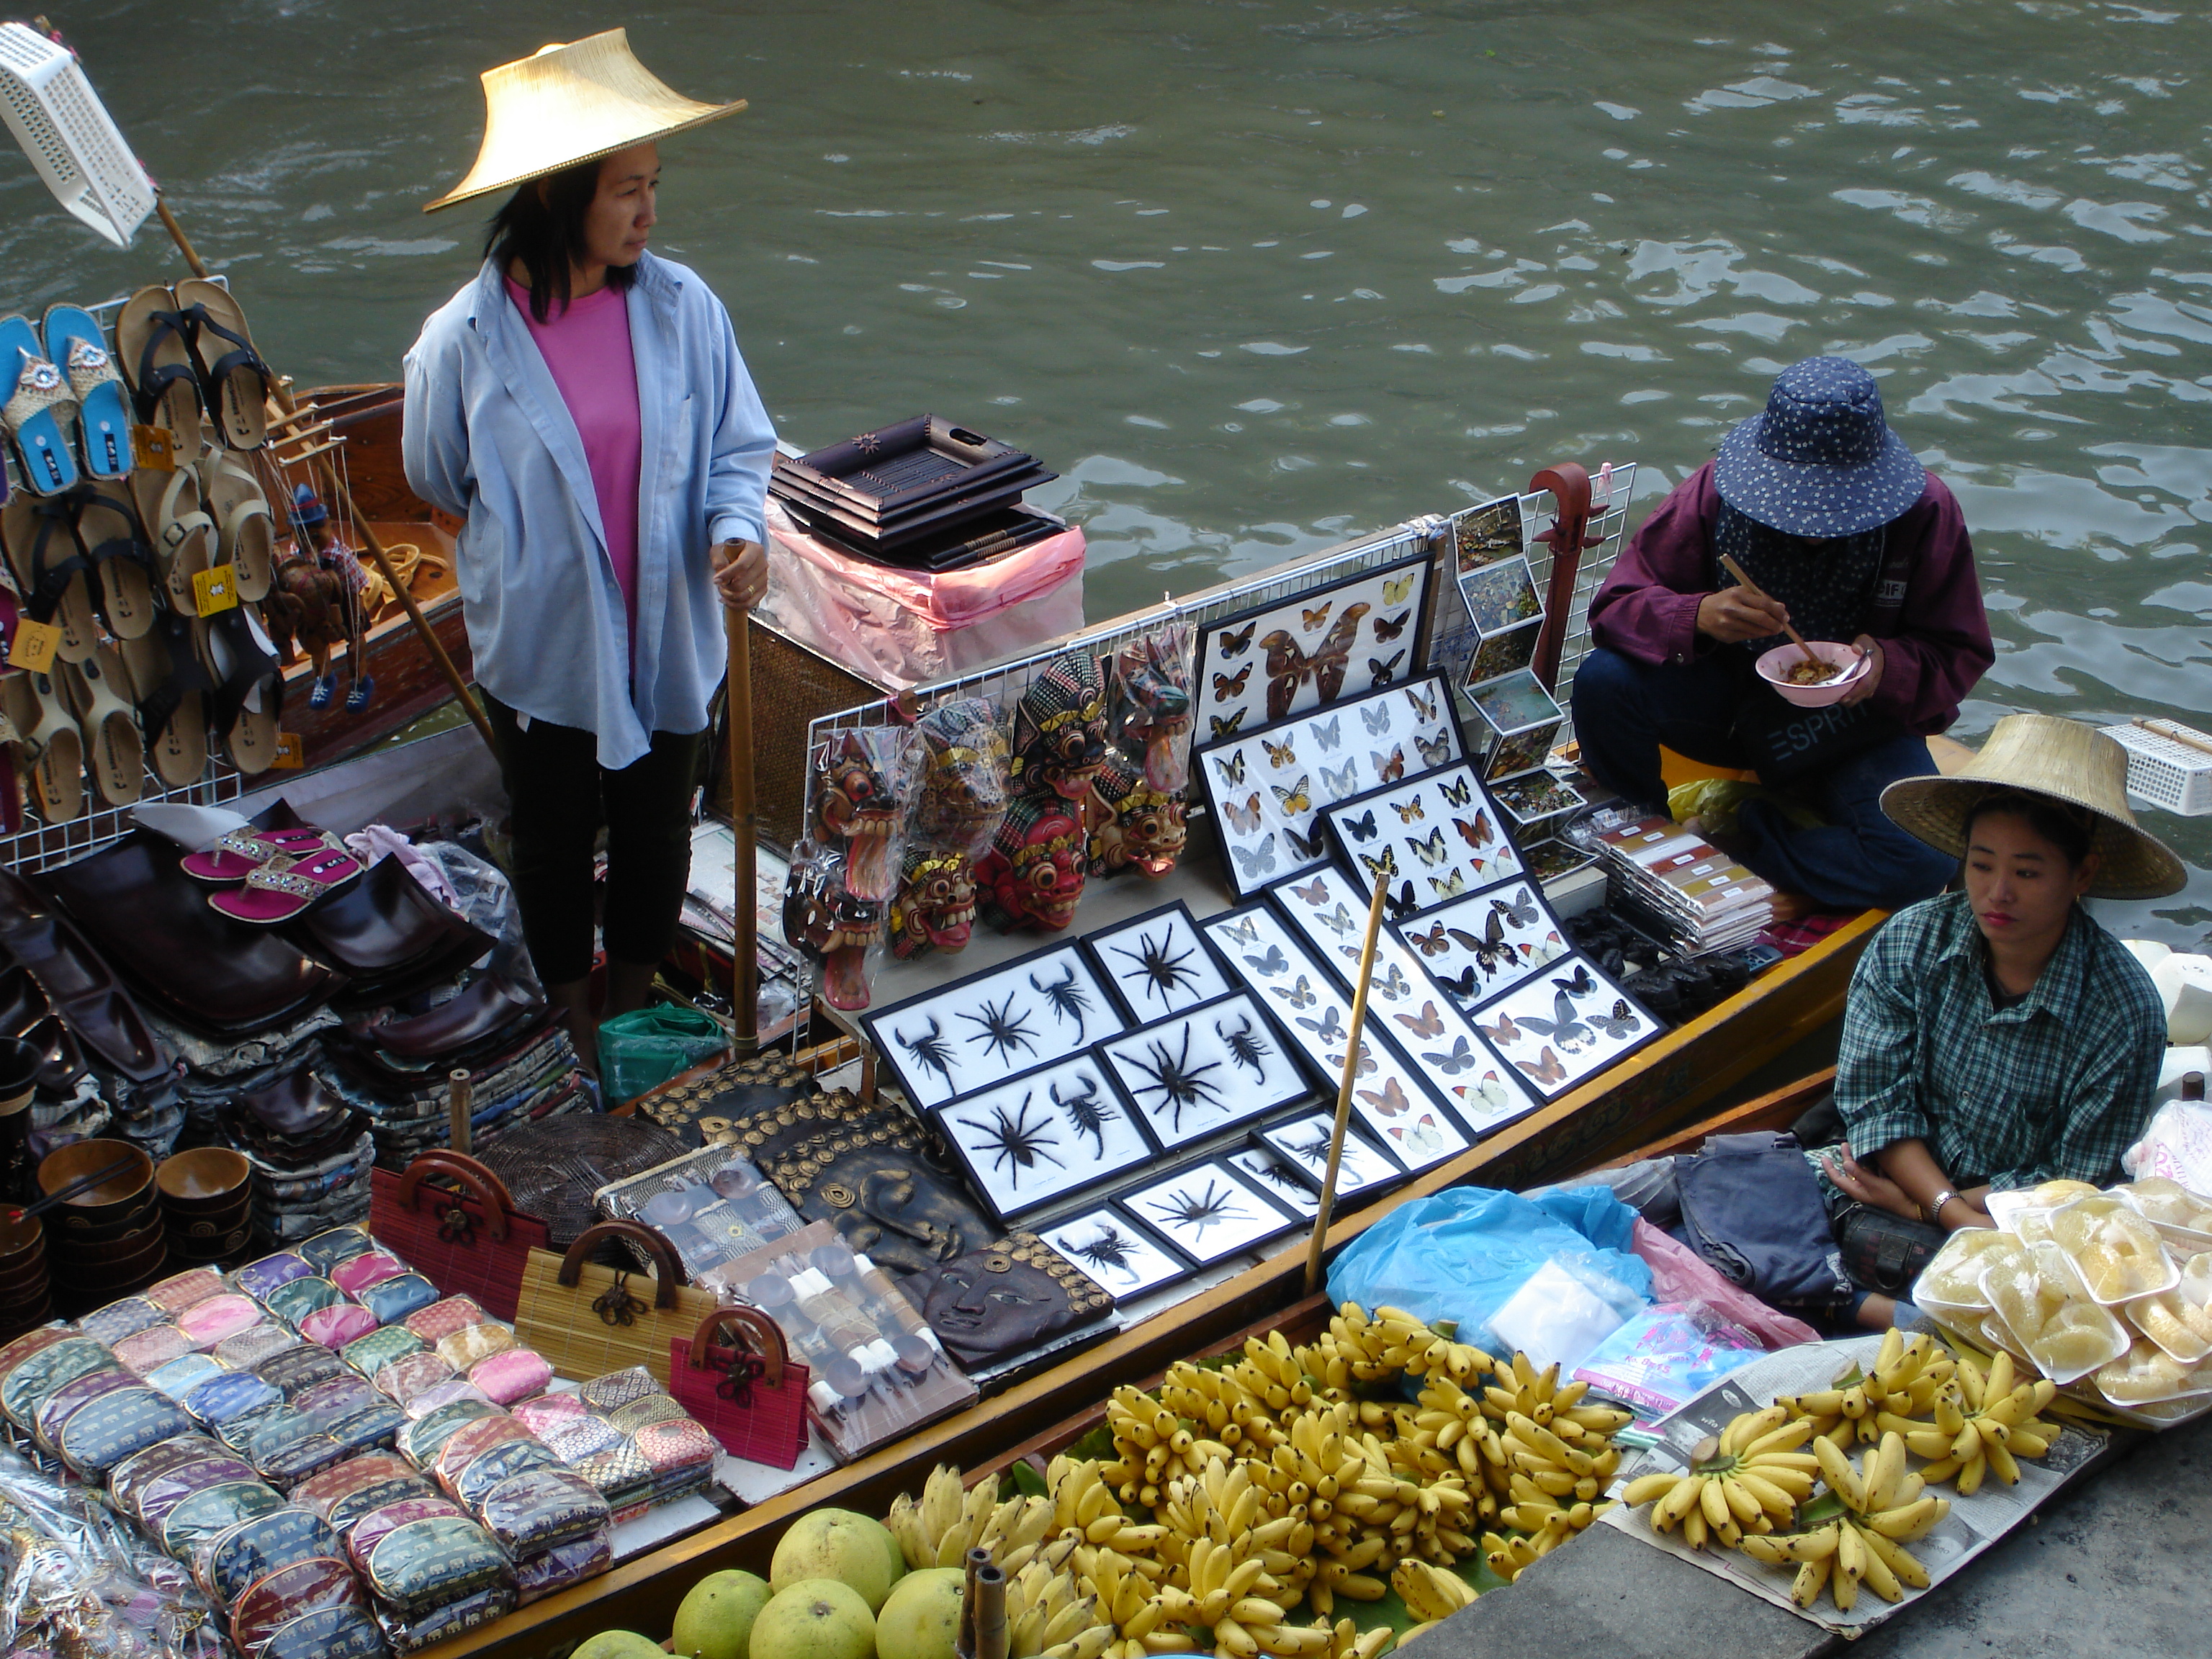 Just about everything you can find in a regular land-based village market in Thailand, you can find at the Damnoen Saduak Floating Market at higher prices but better ambiance. Photo taken by Mark Joseph Jochim on January 10, 2006.